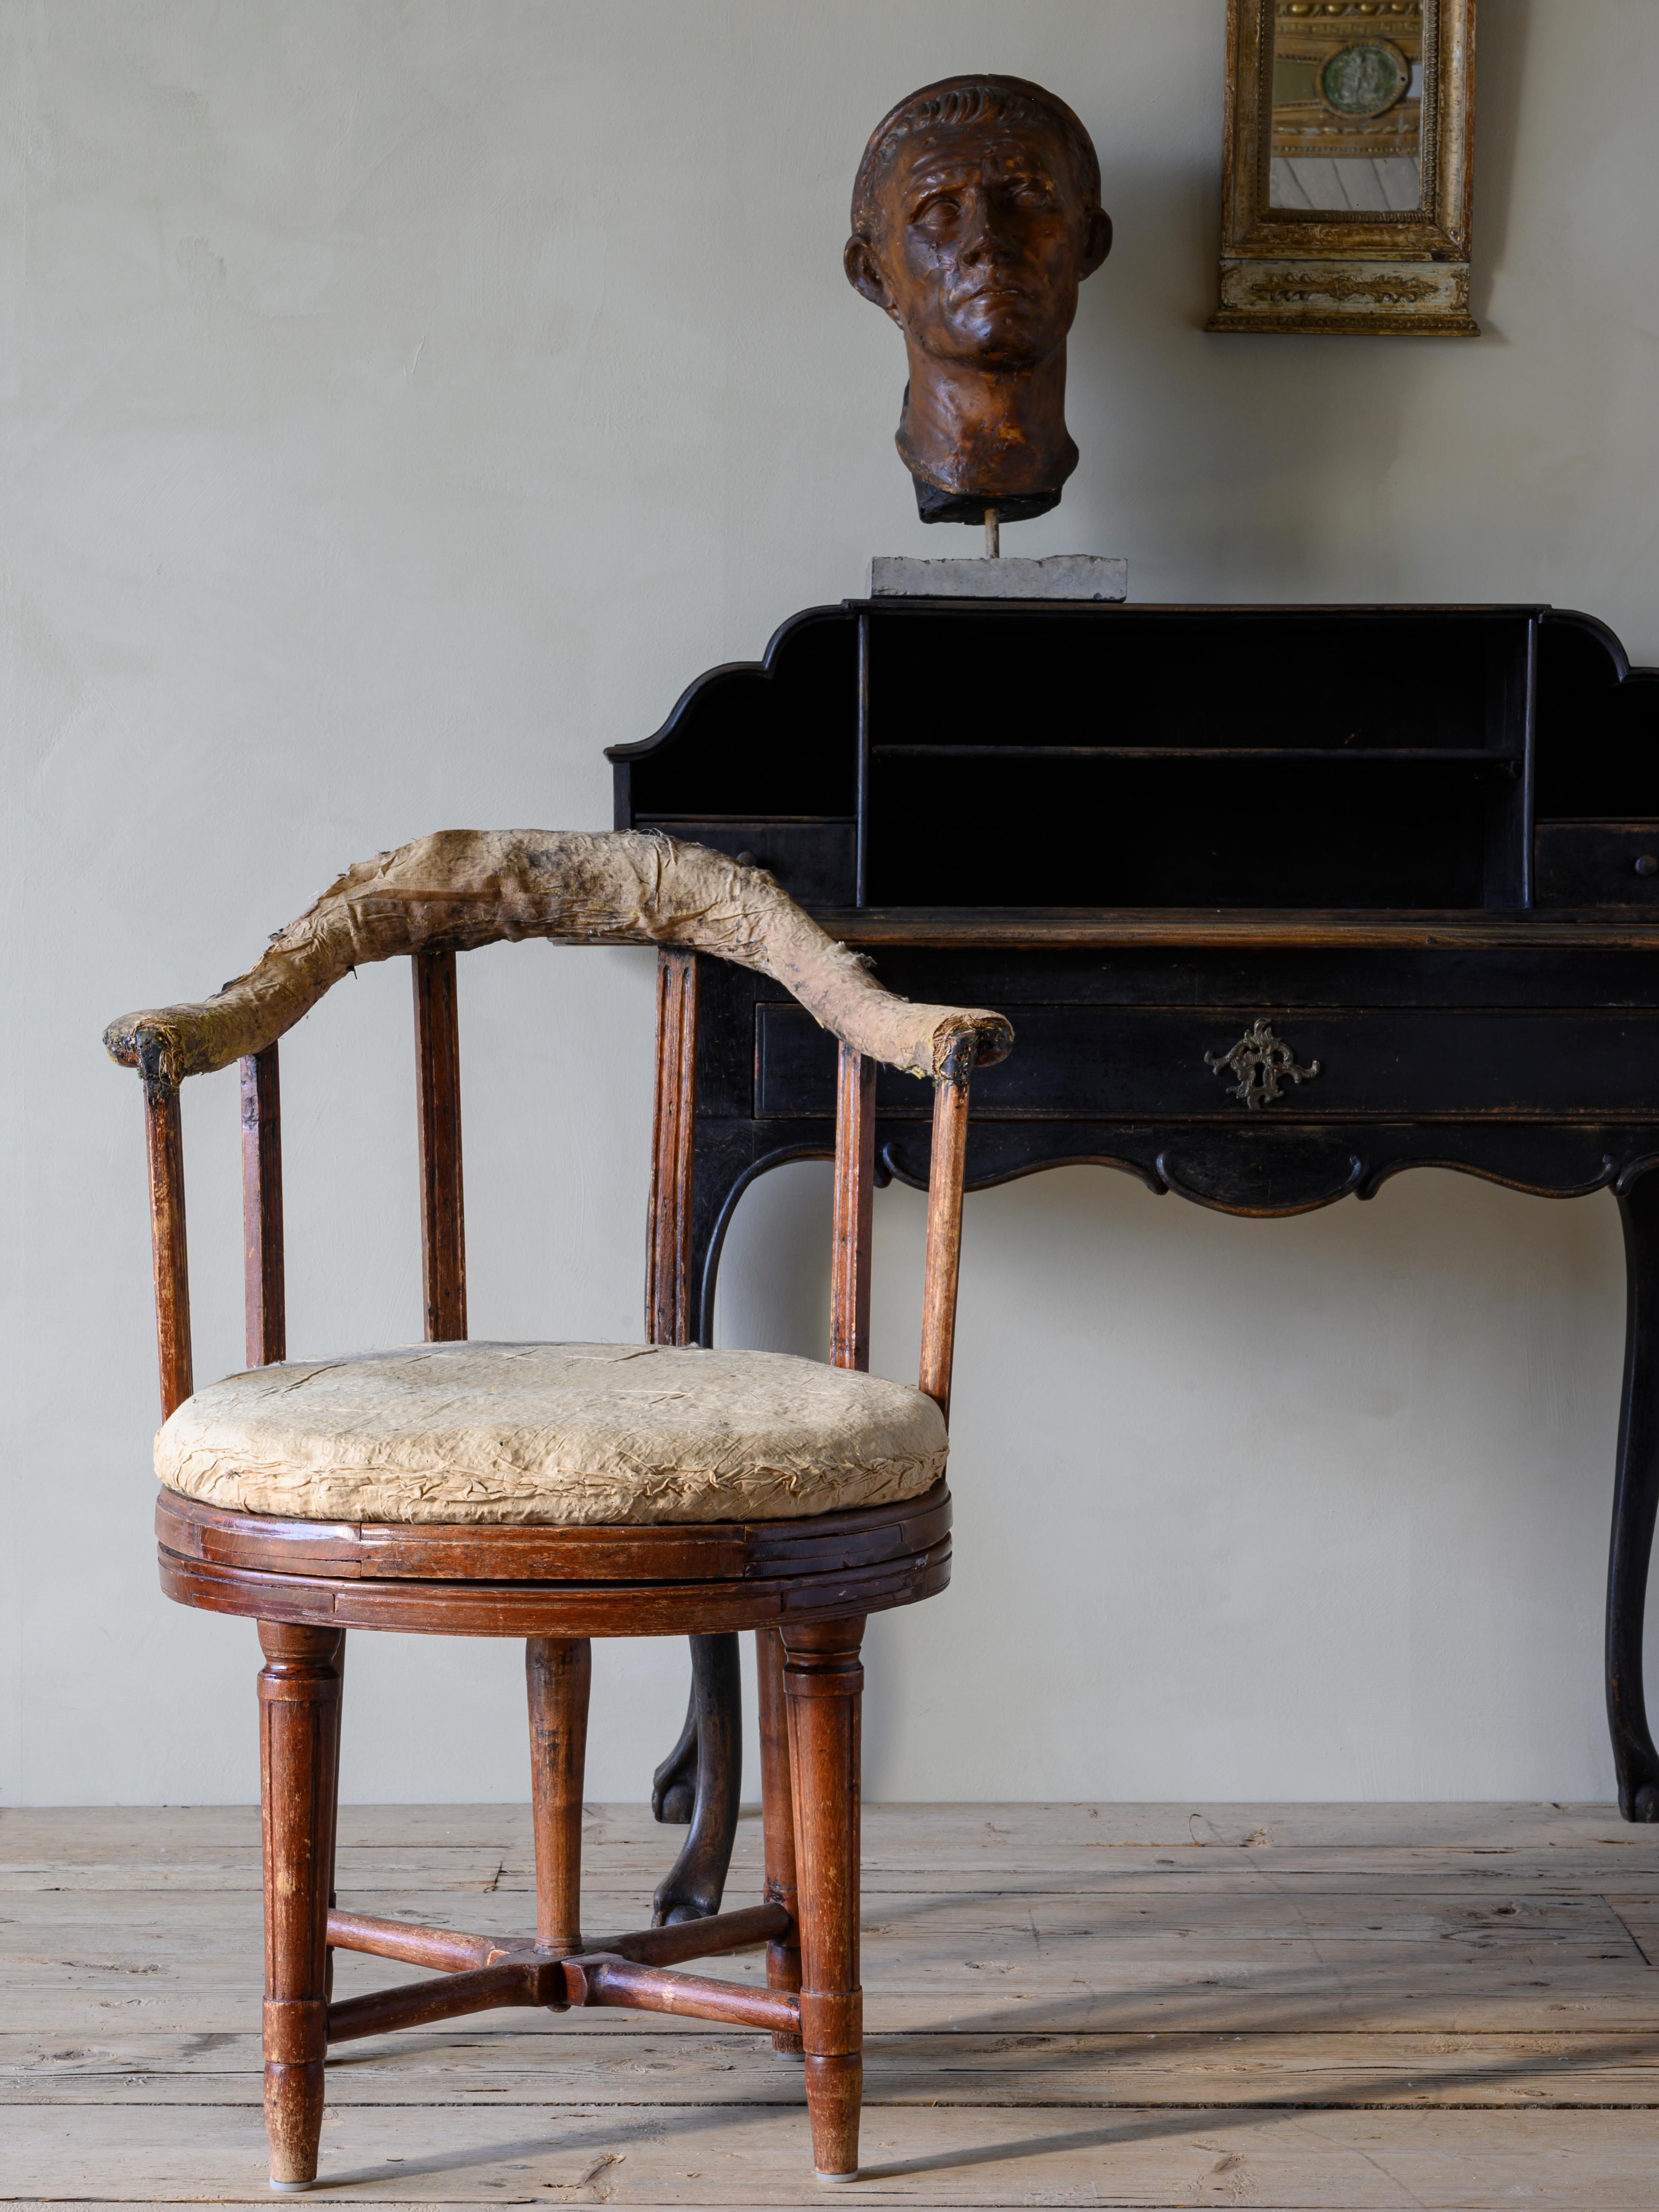 Remarkable 19th-century Gustavian revolving desk chair in its original condition, circa 1810, Sweden.

The condition of the chair is very good containing its original finish and padding to the seat cushion and backrest. There are two historic